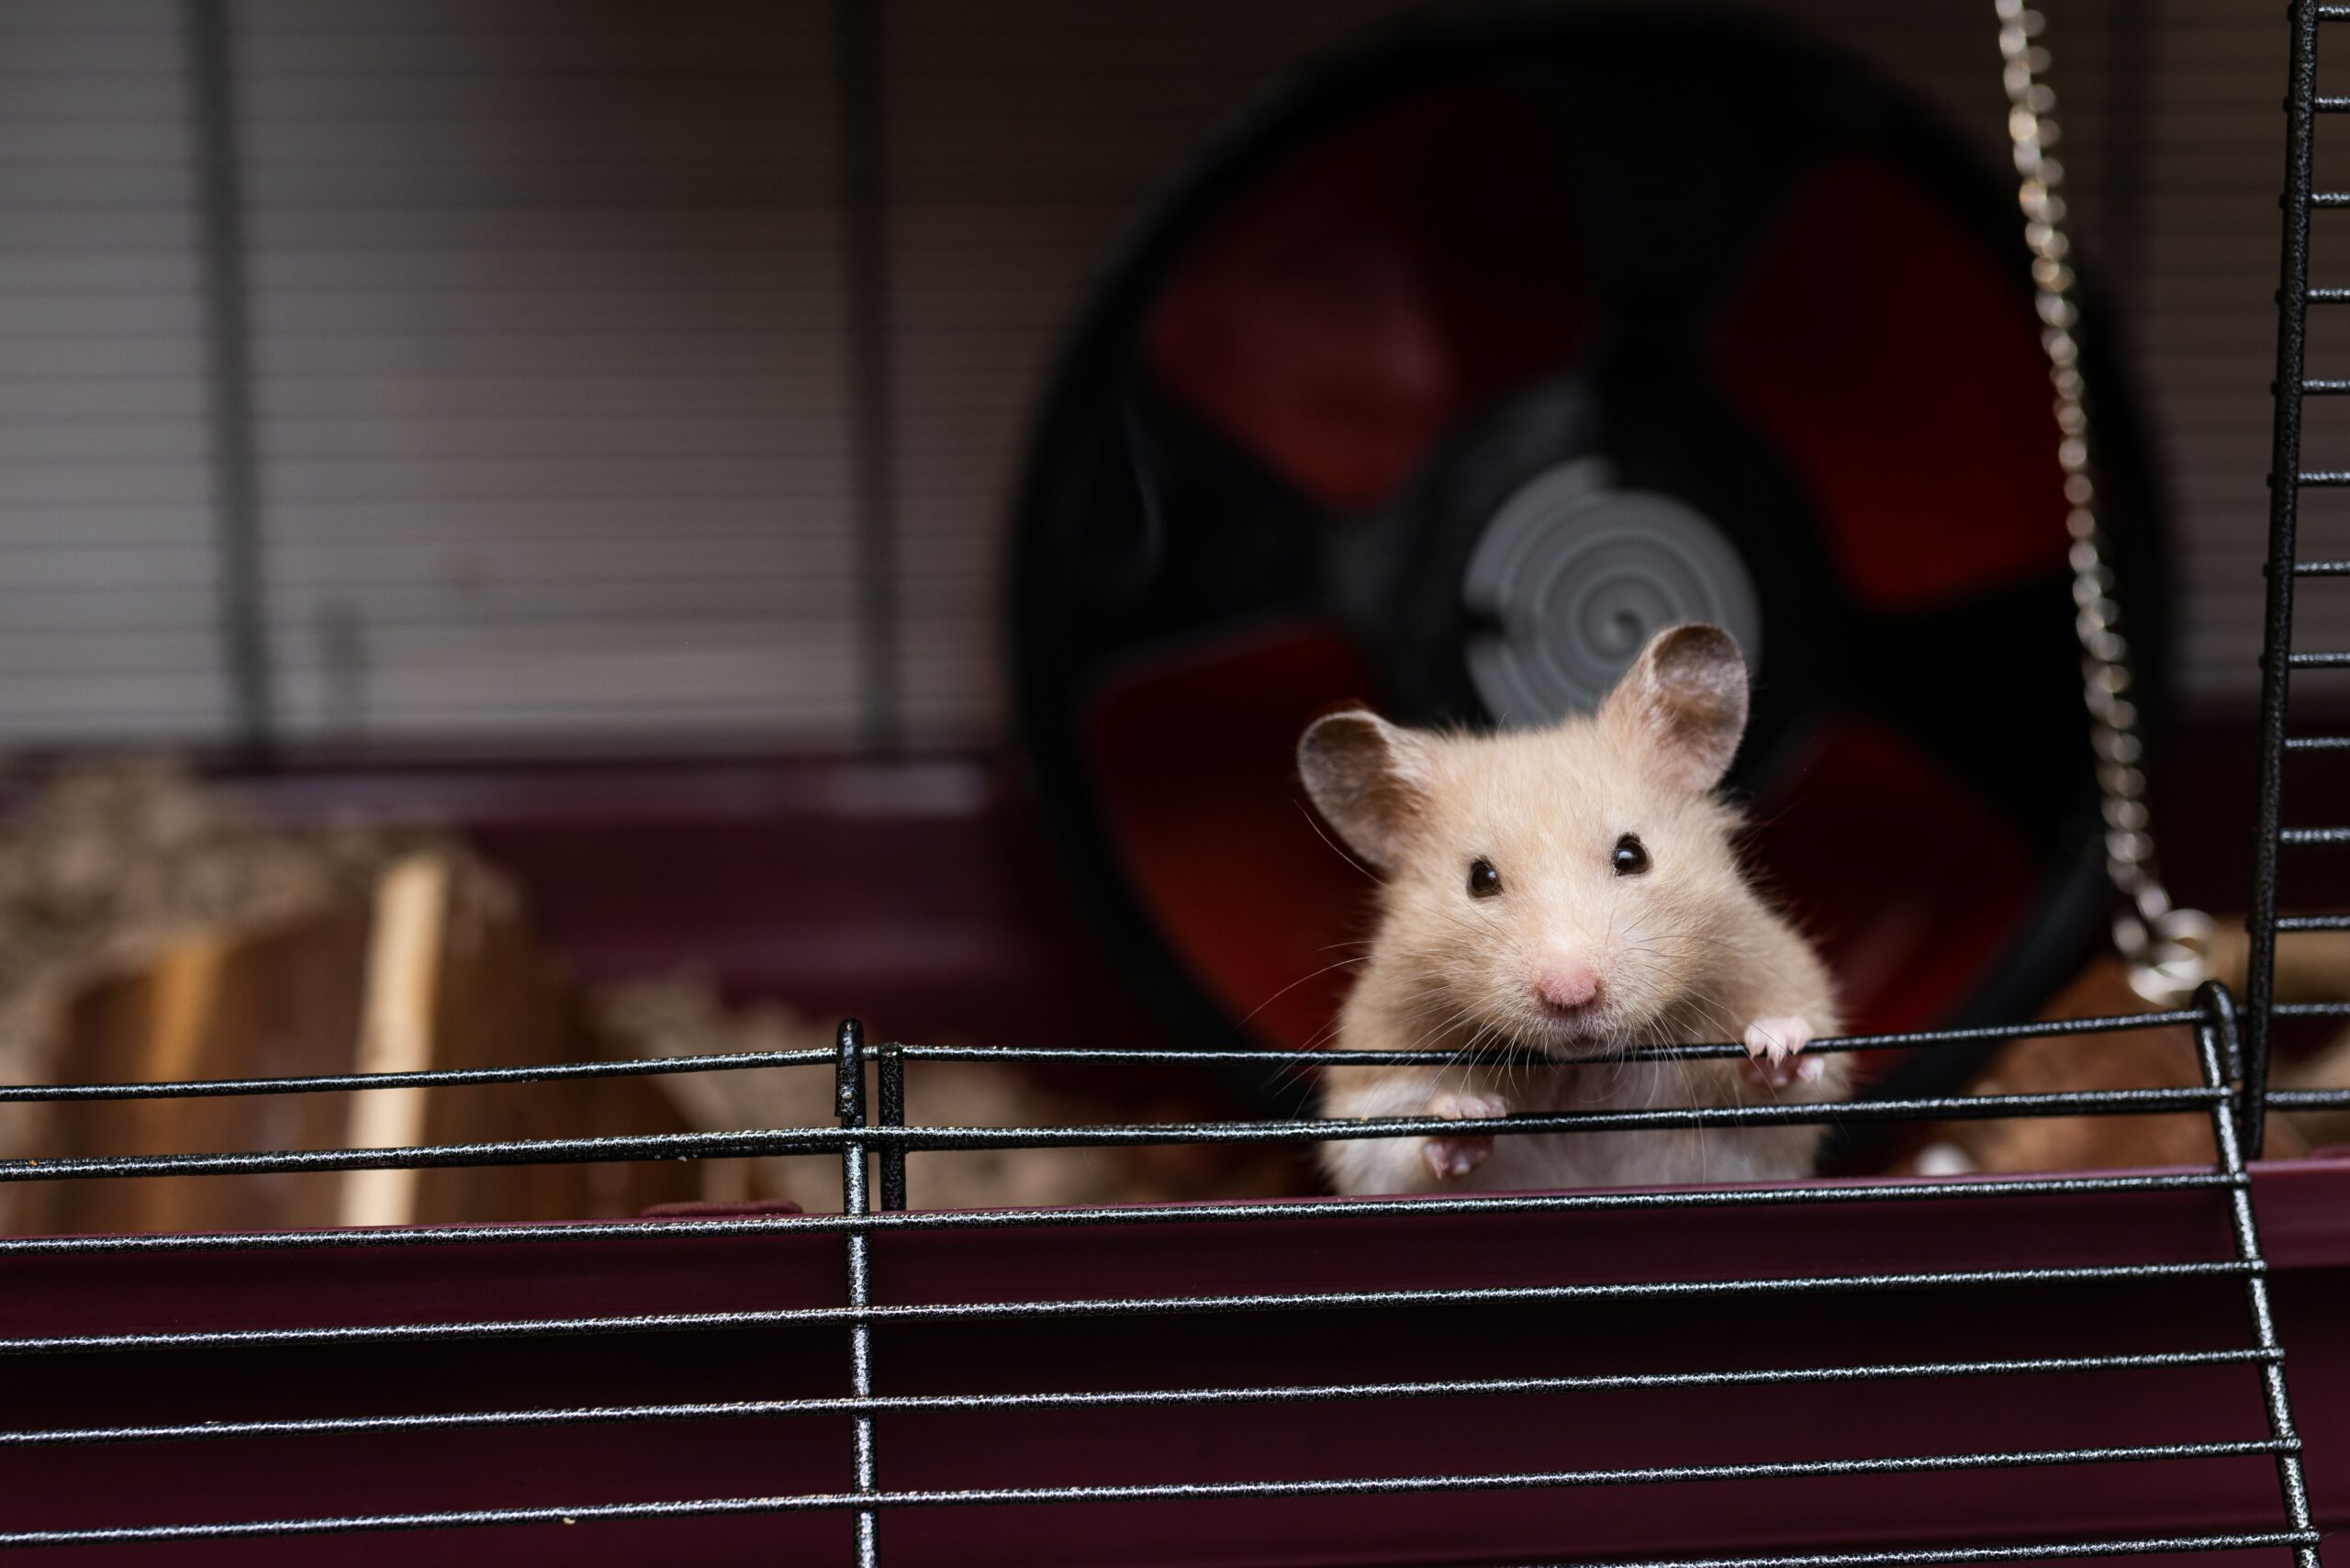 Do Hamsters Have Emotions?